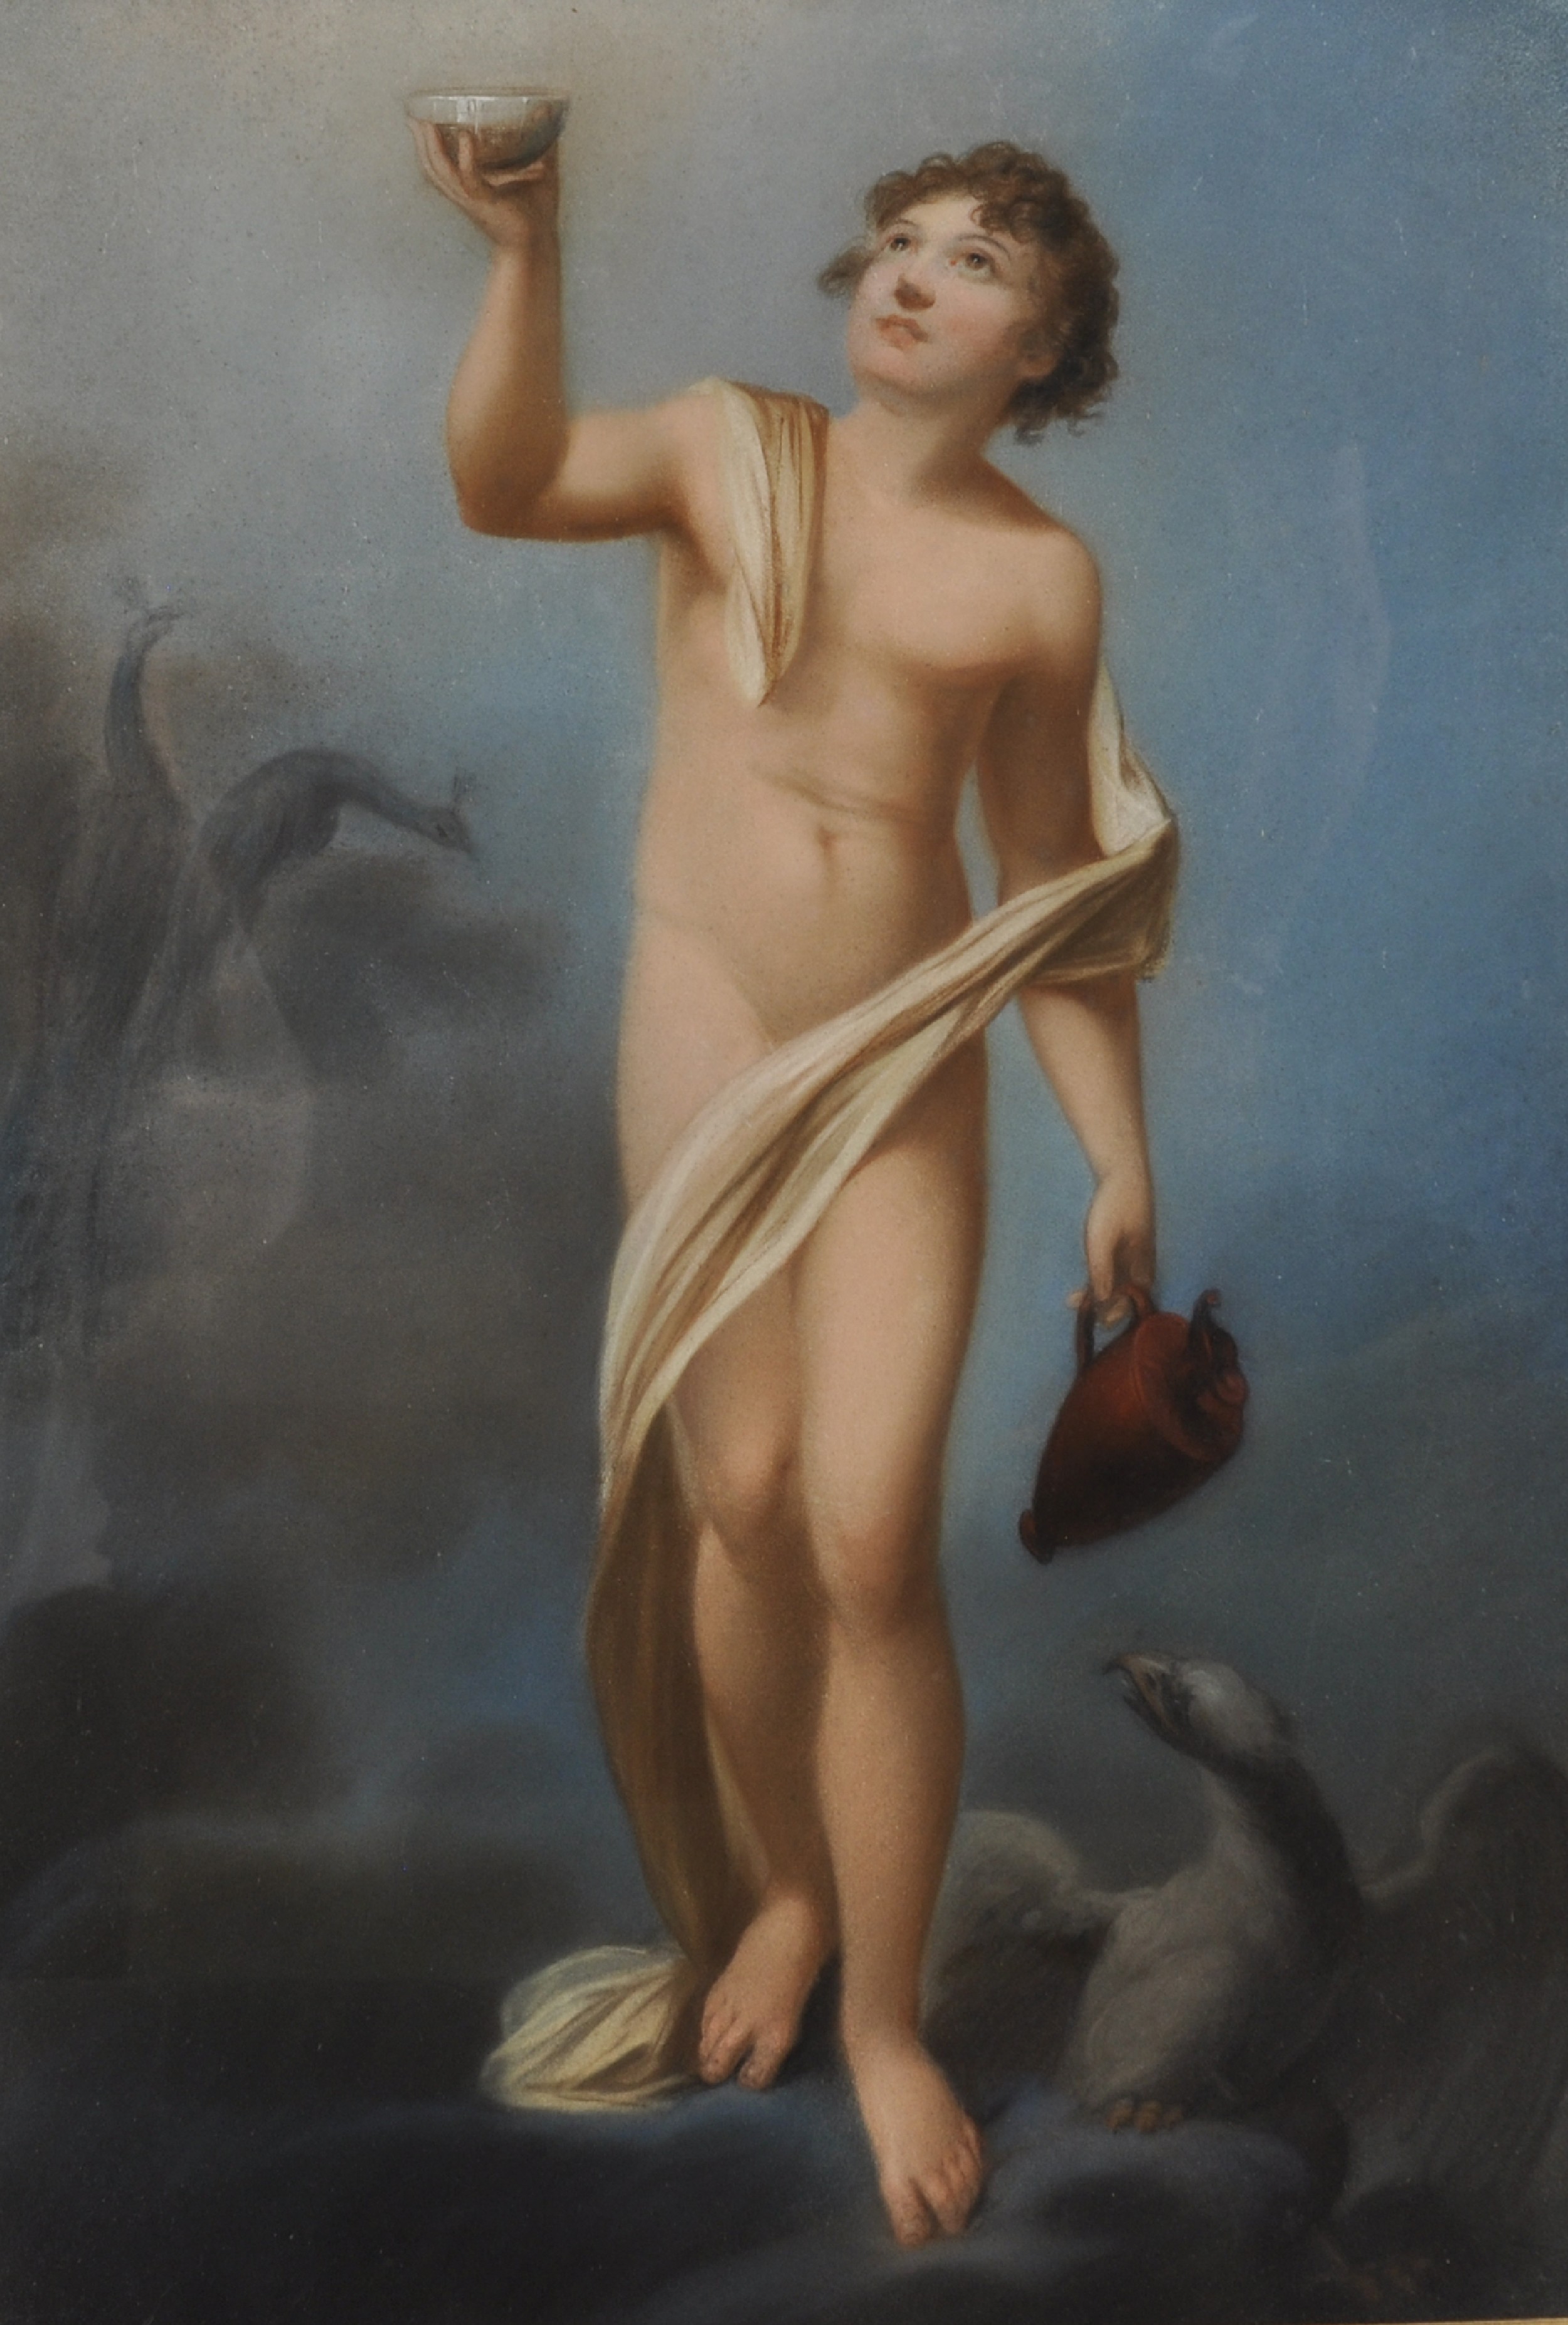 19th Century French School. Study of a Boy holding up a Cup, Pastel, 24.5" x 17.5", and the